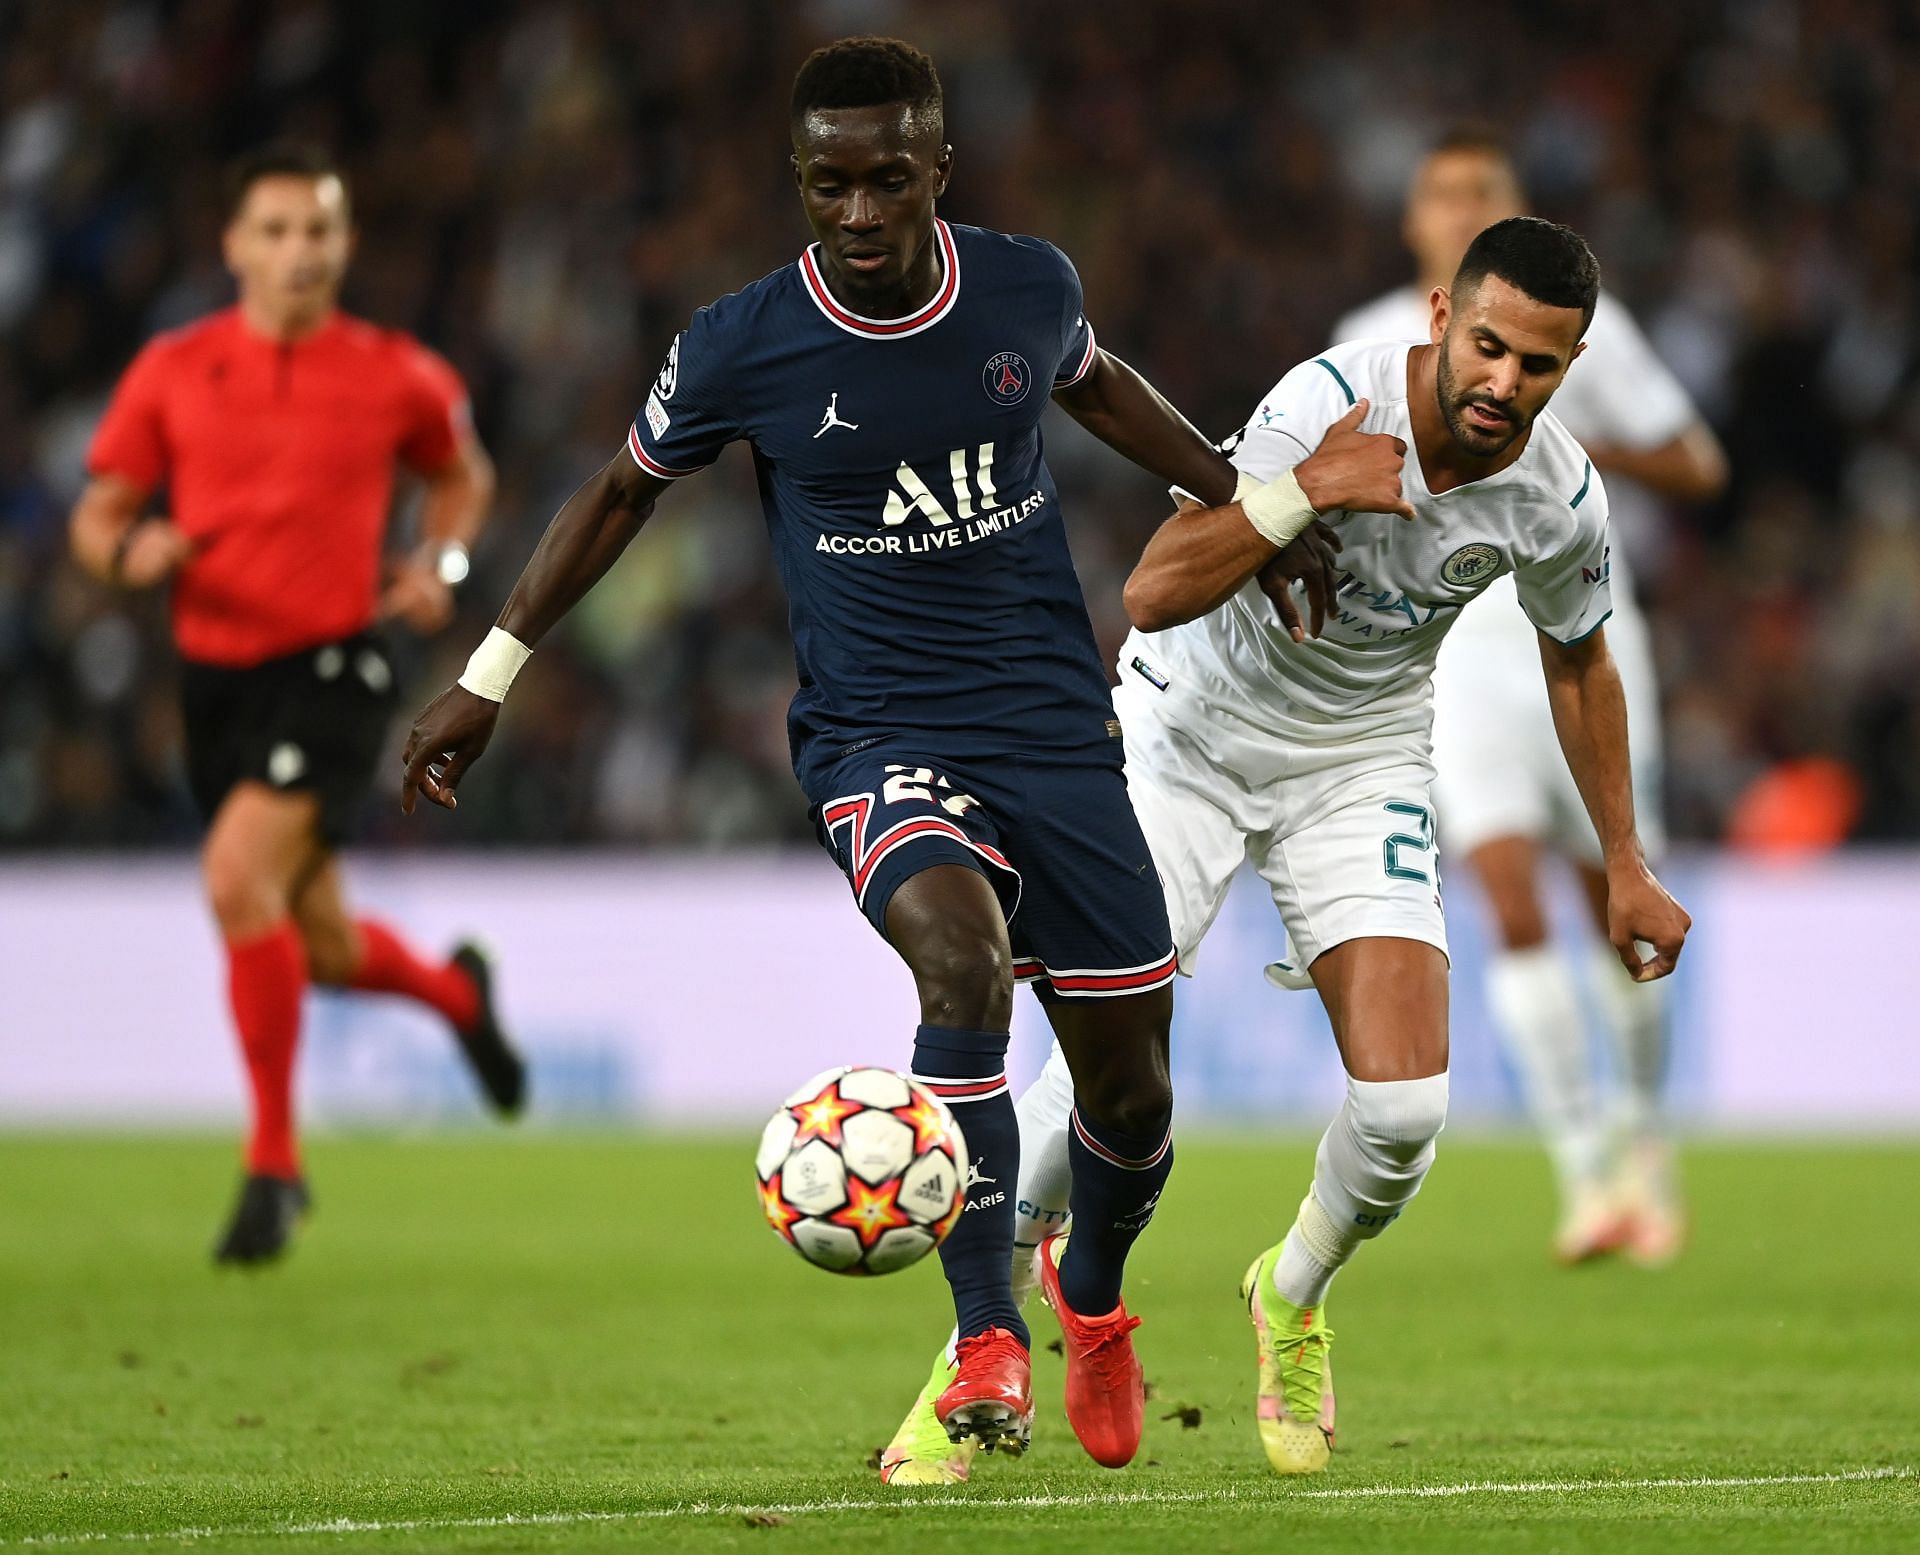 Idrissa Gueye has been a solid midfielder for PSG